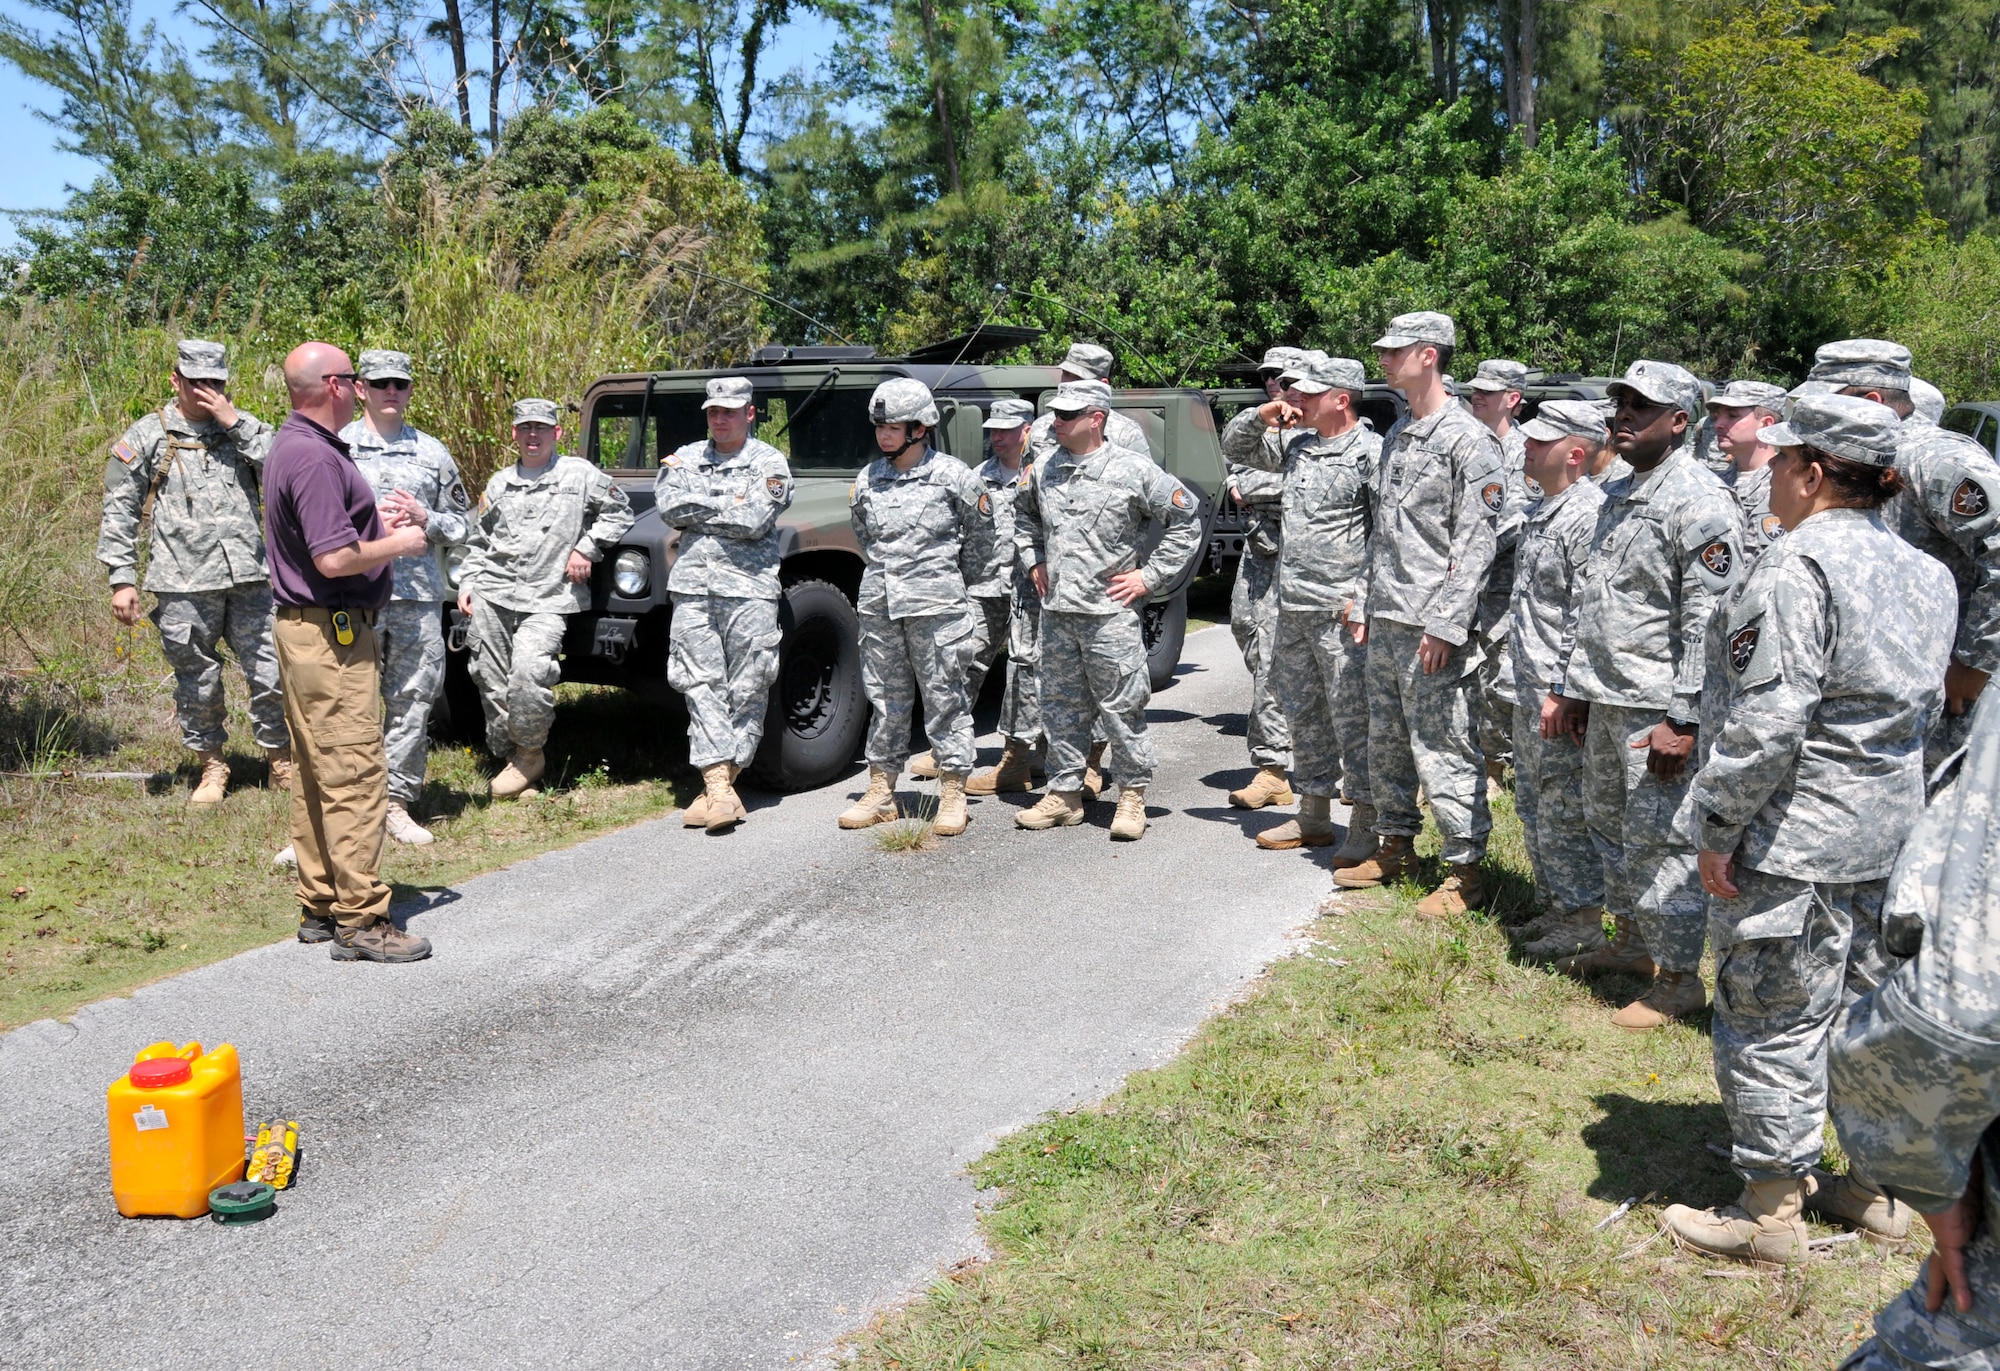 Michael Clay (left), an Army consultant who specializes in counter improvised explosive device training, speaks with soldiers from the Army’s 260th Military Intelligence Battalion Alpha Company out of Miami, Fla., at Homestead Air Reserve Base, Fla., April 6. The soldiers set up camp at the Homestead ARB’s bivouac site to conduct intelligence mission essential task list drills, tactical convoy operations training, enemy contact training, training for near and far ambushes, counter improvised explosive device training, generator training, vehicle recovery operations training, and driver lane training.  (U.S. Air Force photo/Senior Airman Nicholas Caceres)